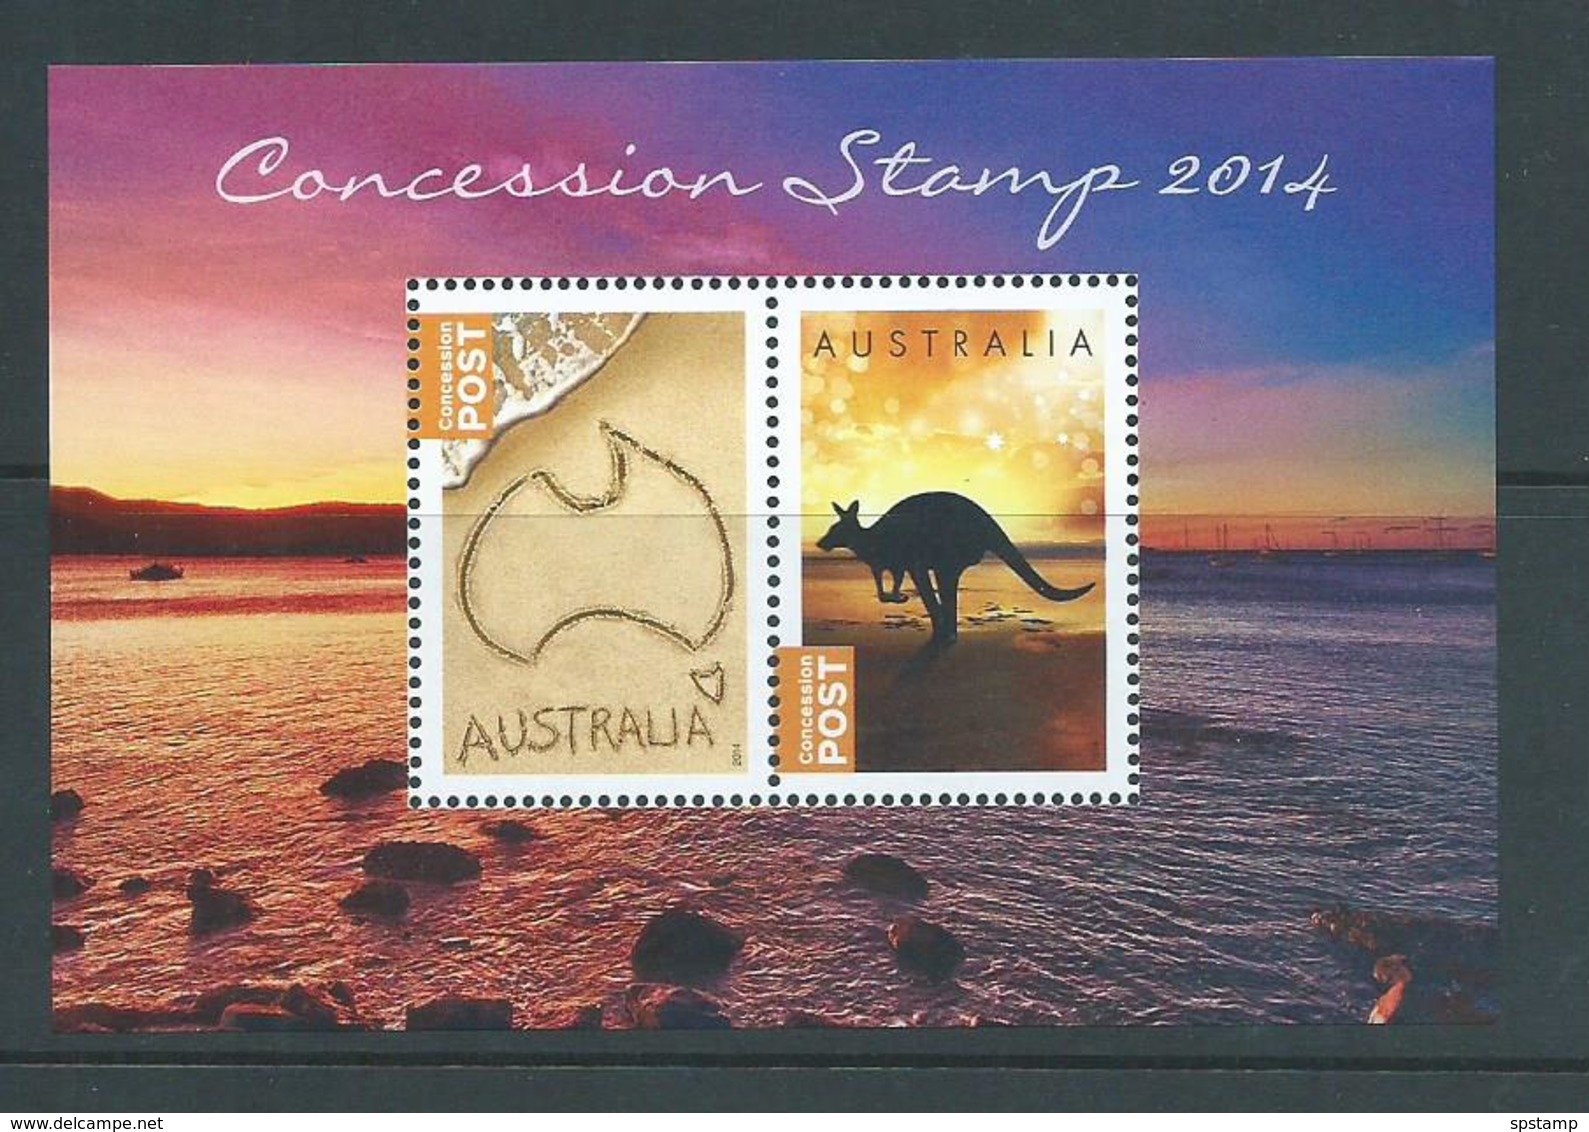 Australia 2014 Undenominated Concession Stamps Miniature Sheet Of 2 MNH - Mint Stamps